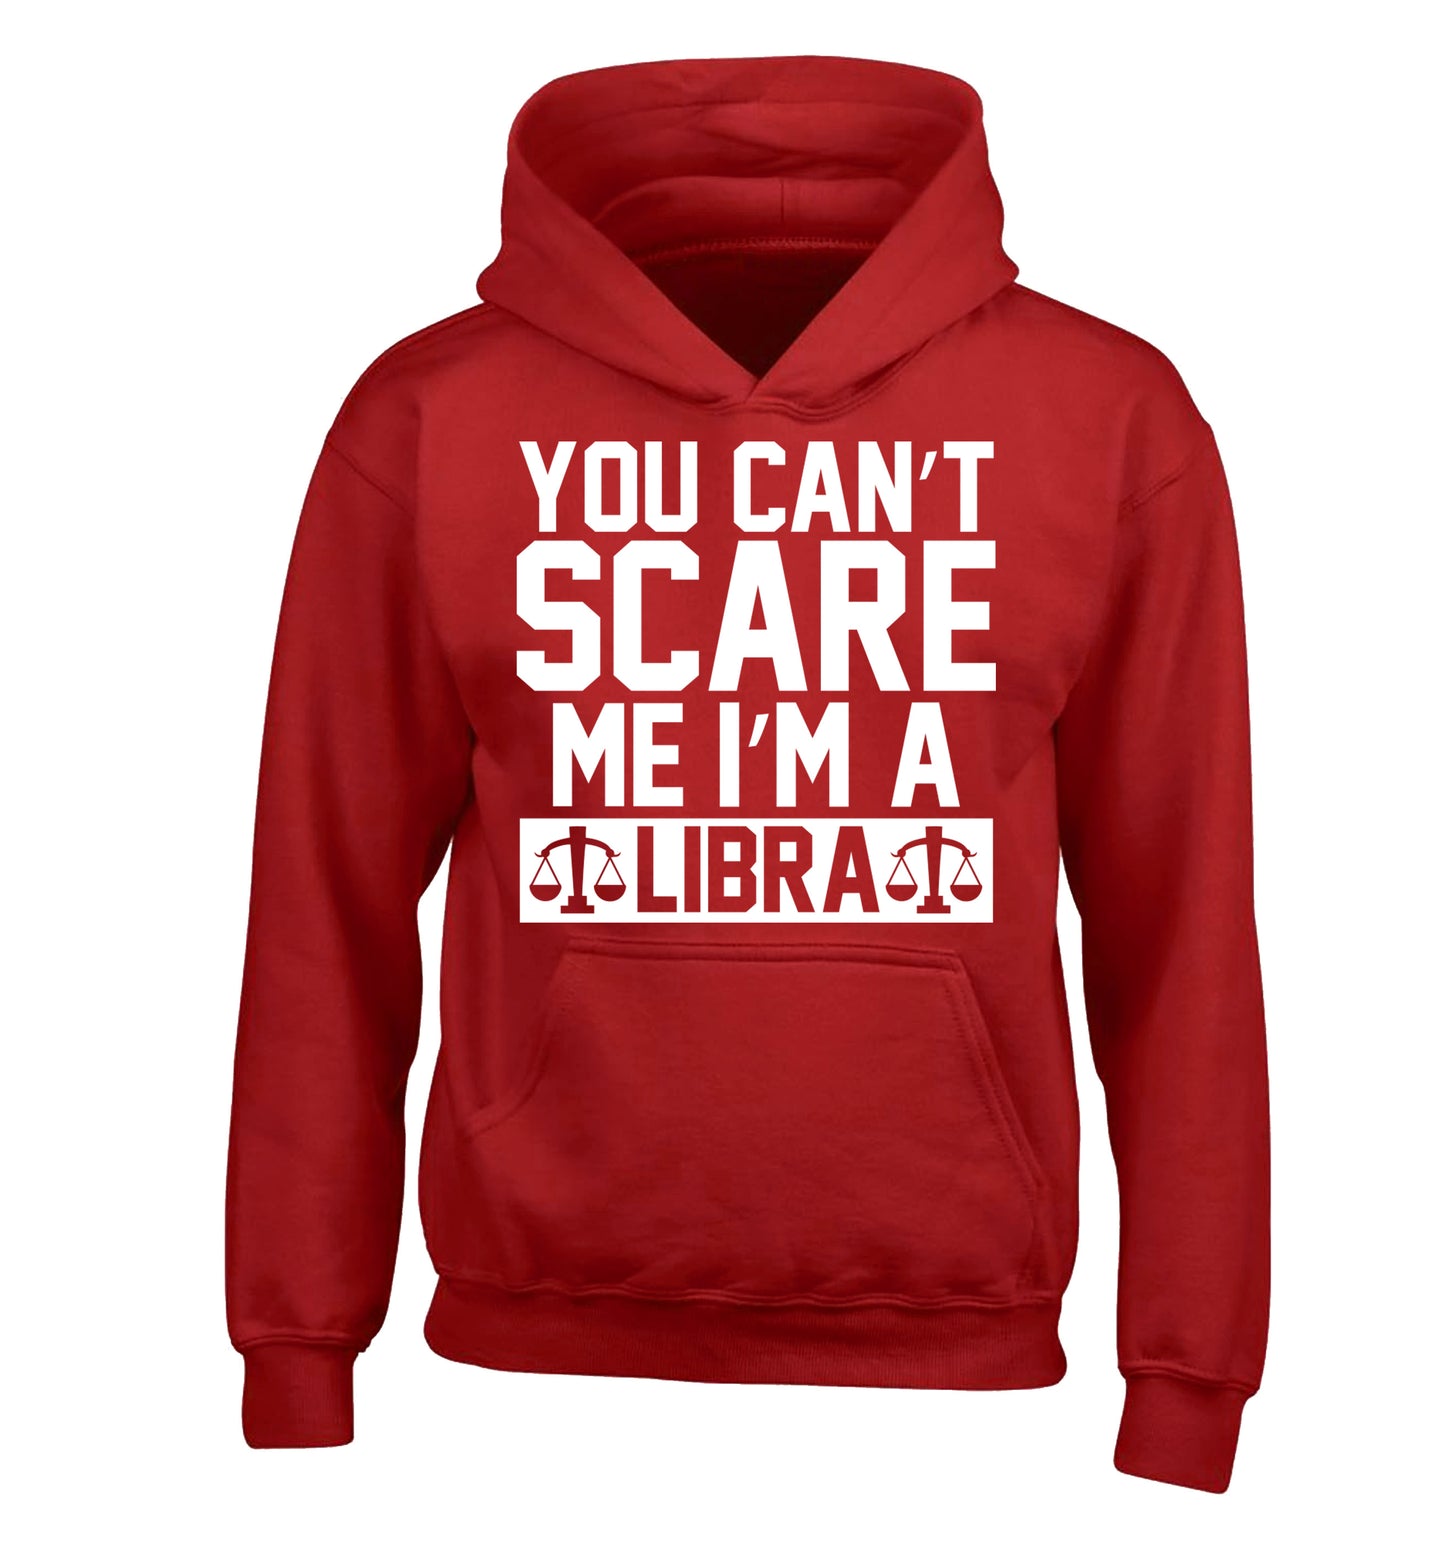 You can't scare me I'm a libra children's red hoodie 12-13 Years